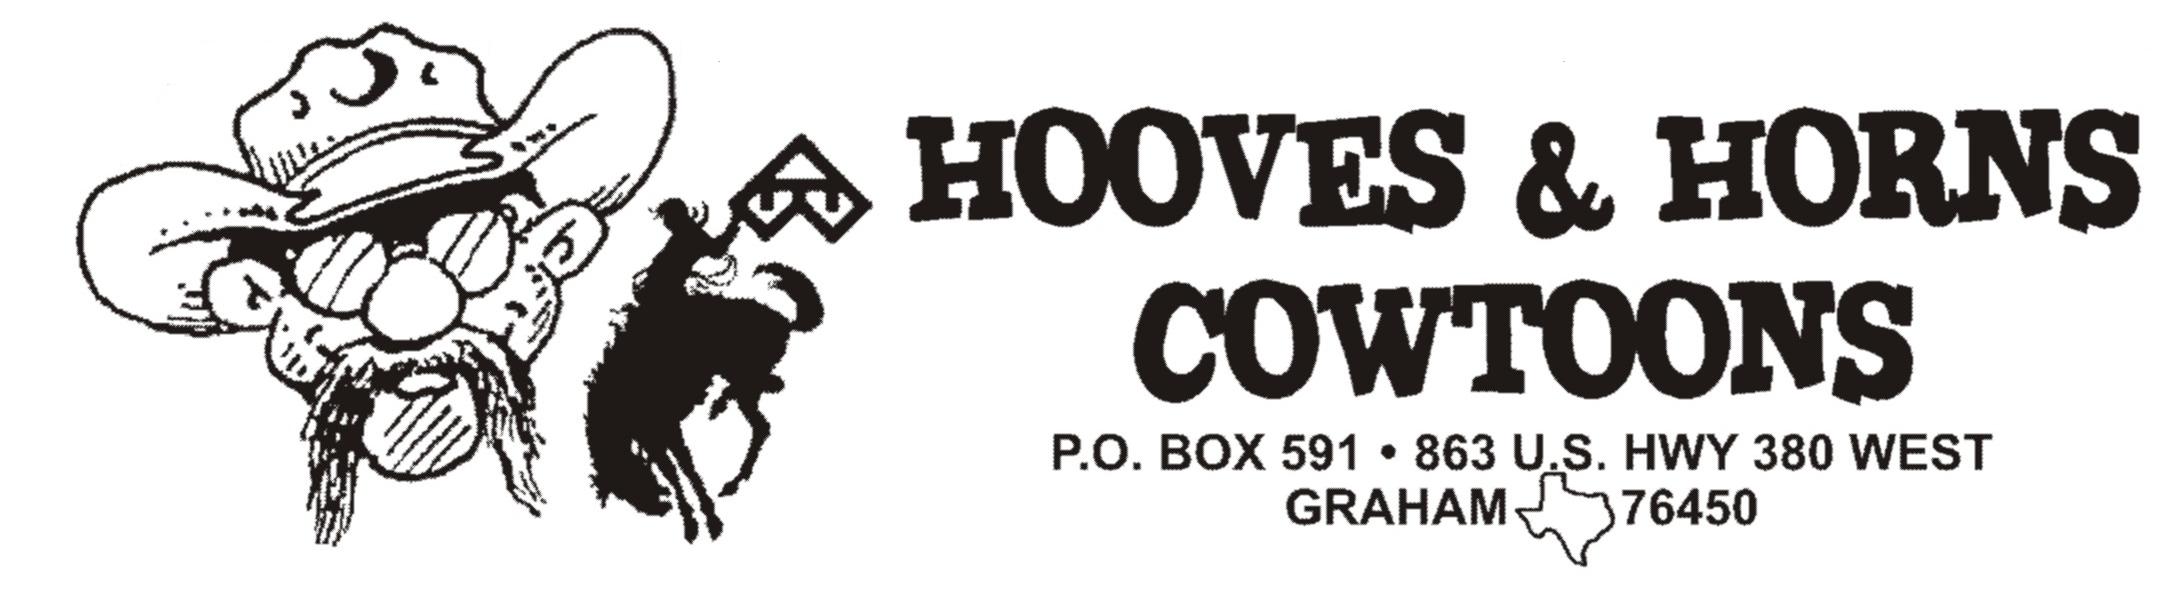 HOOVES & HORNS COWTOONS 